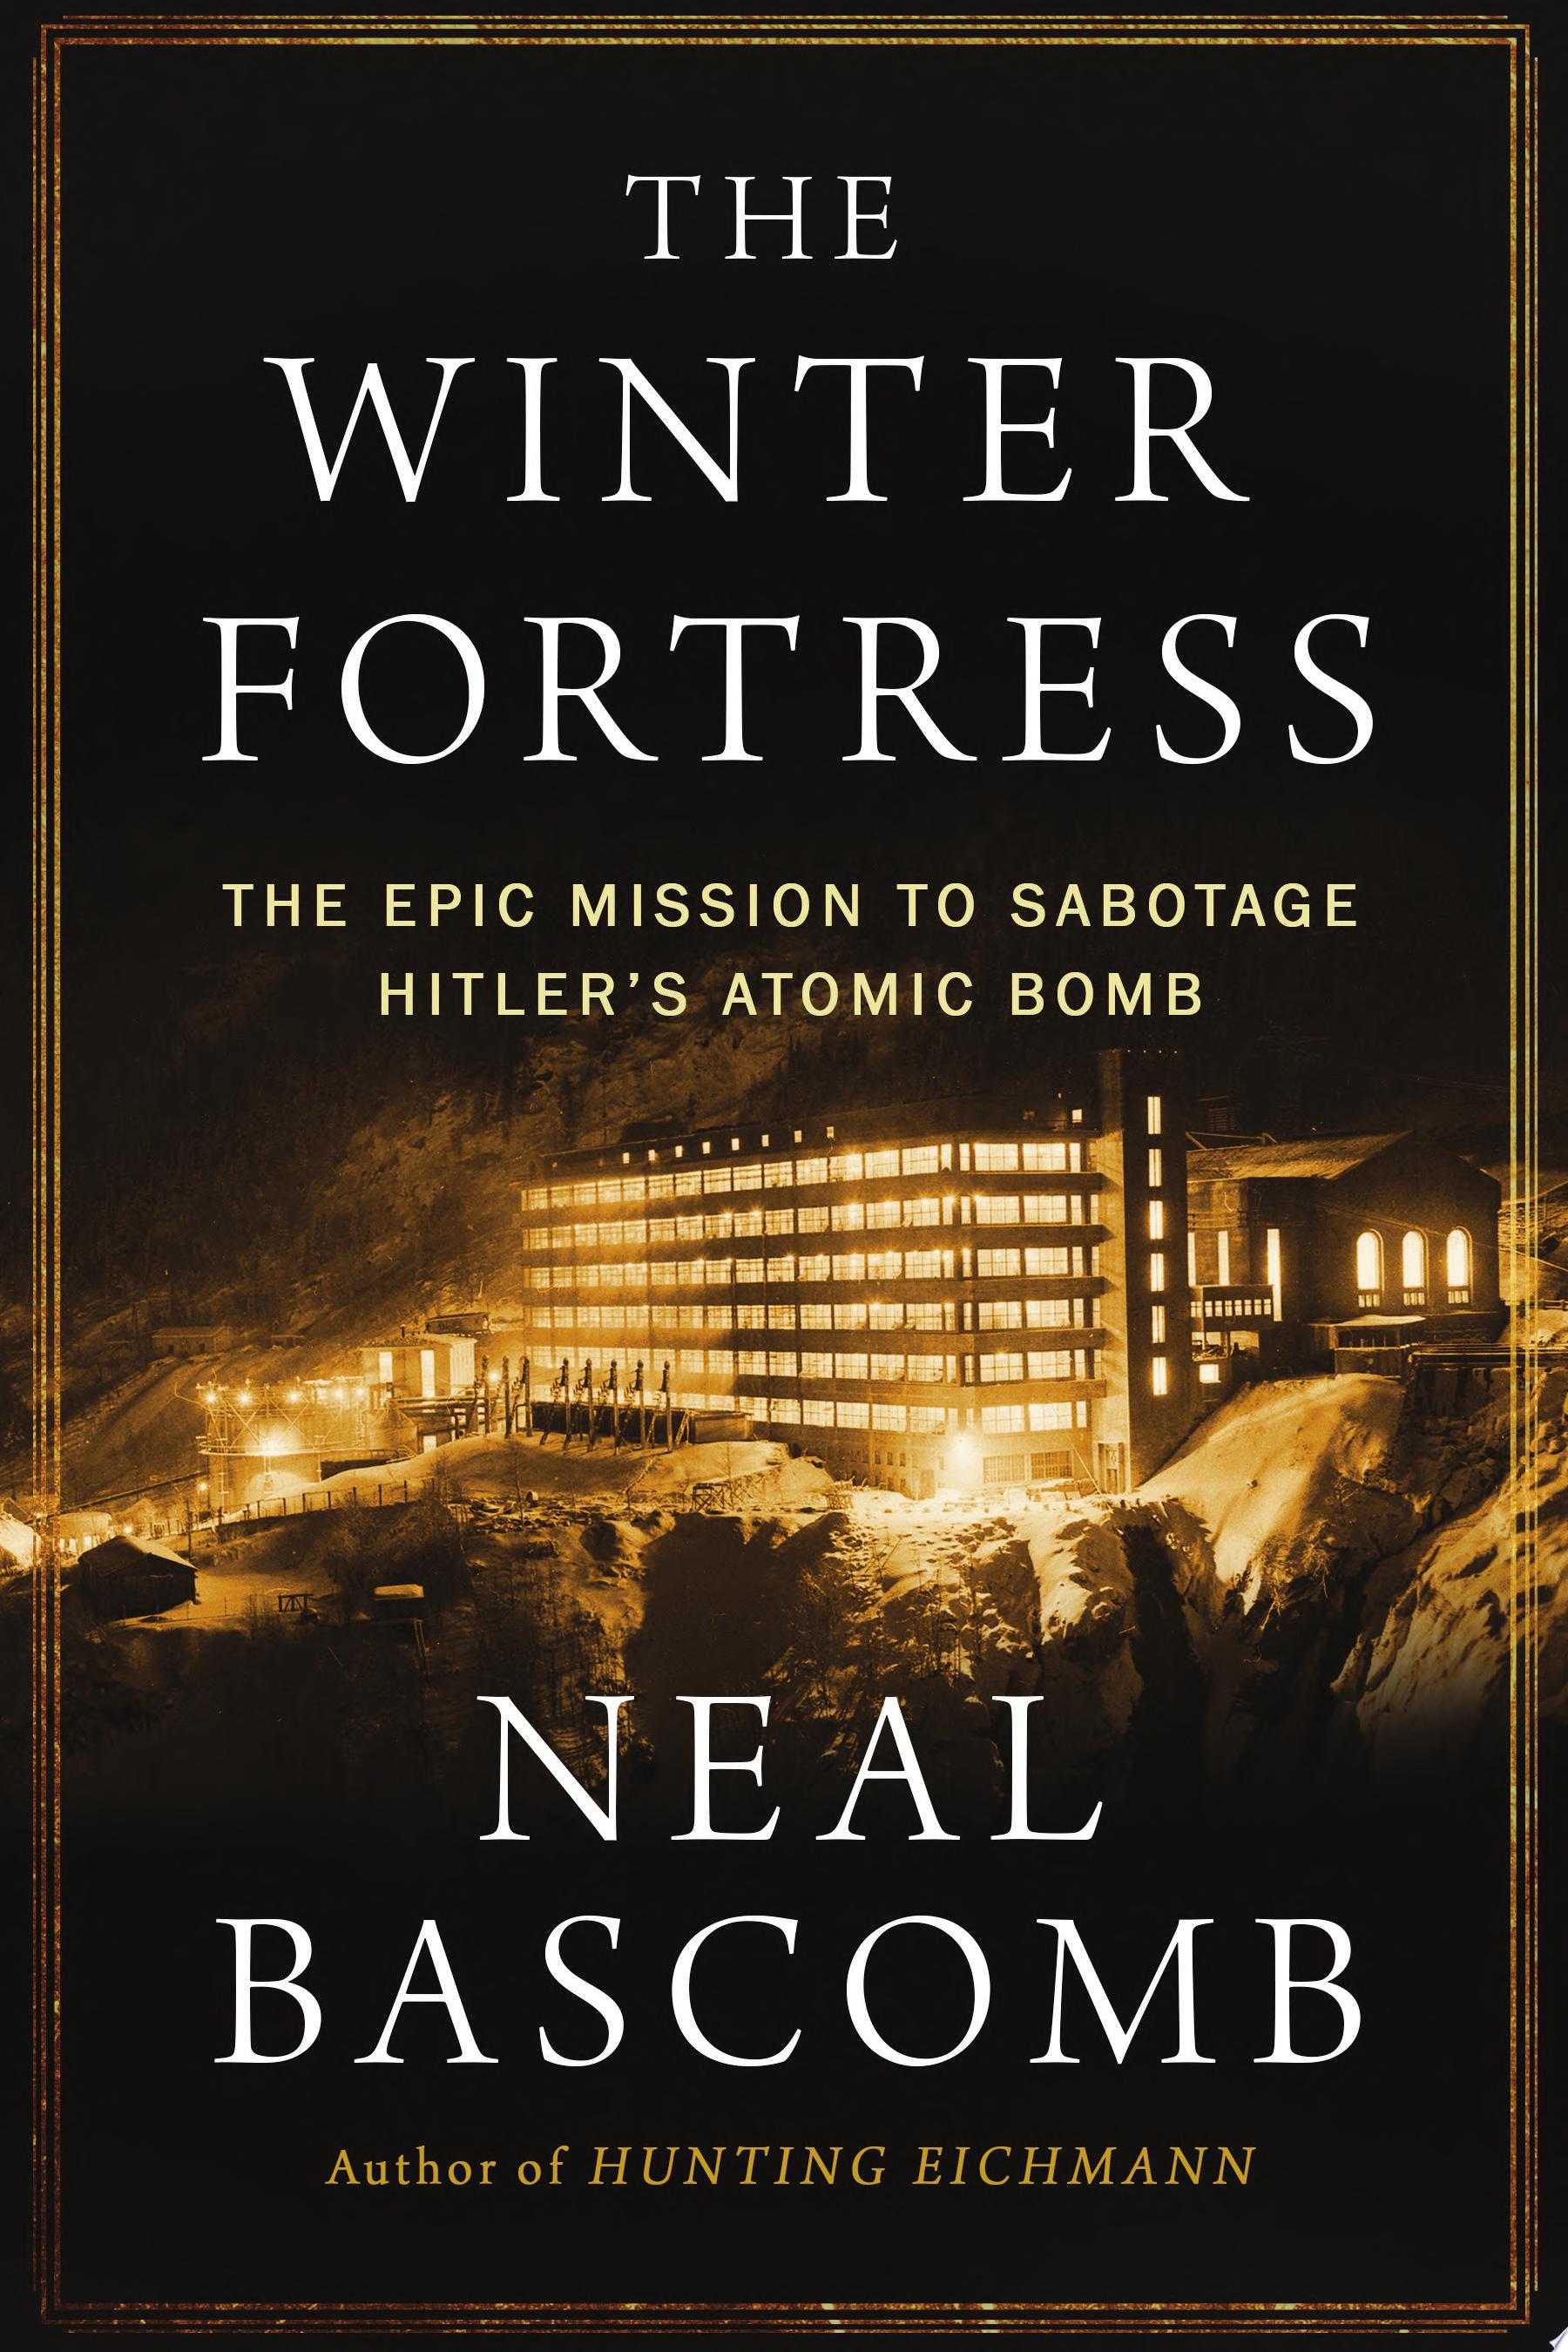 Image for "The Winter Fortress"